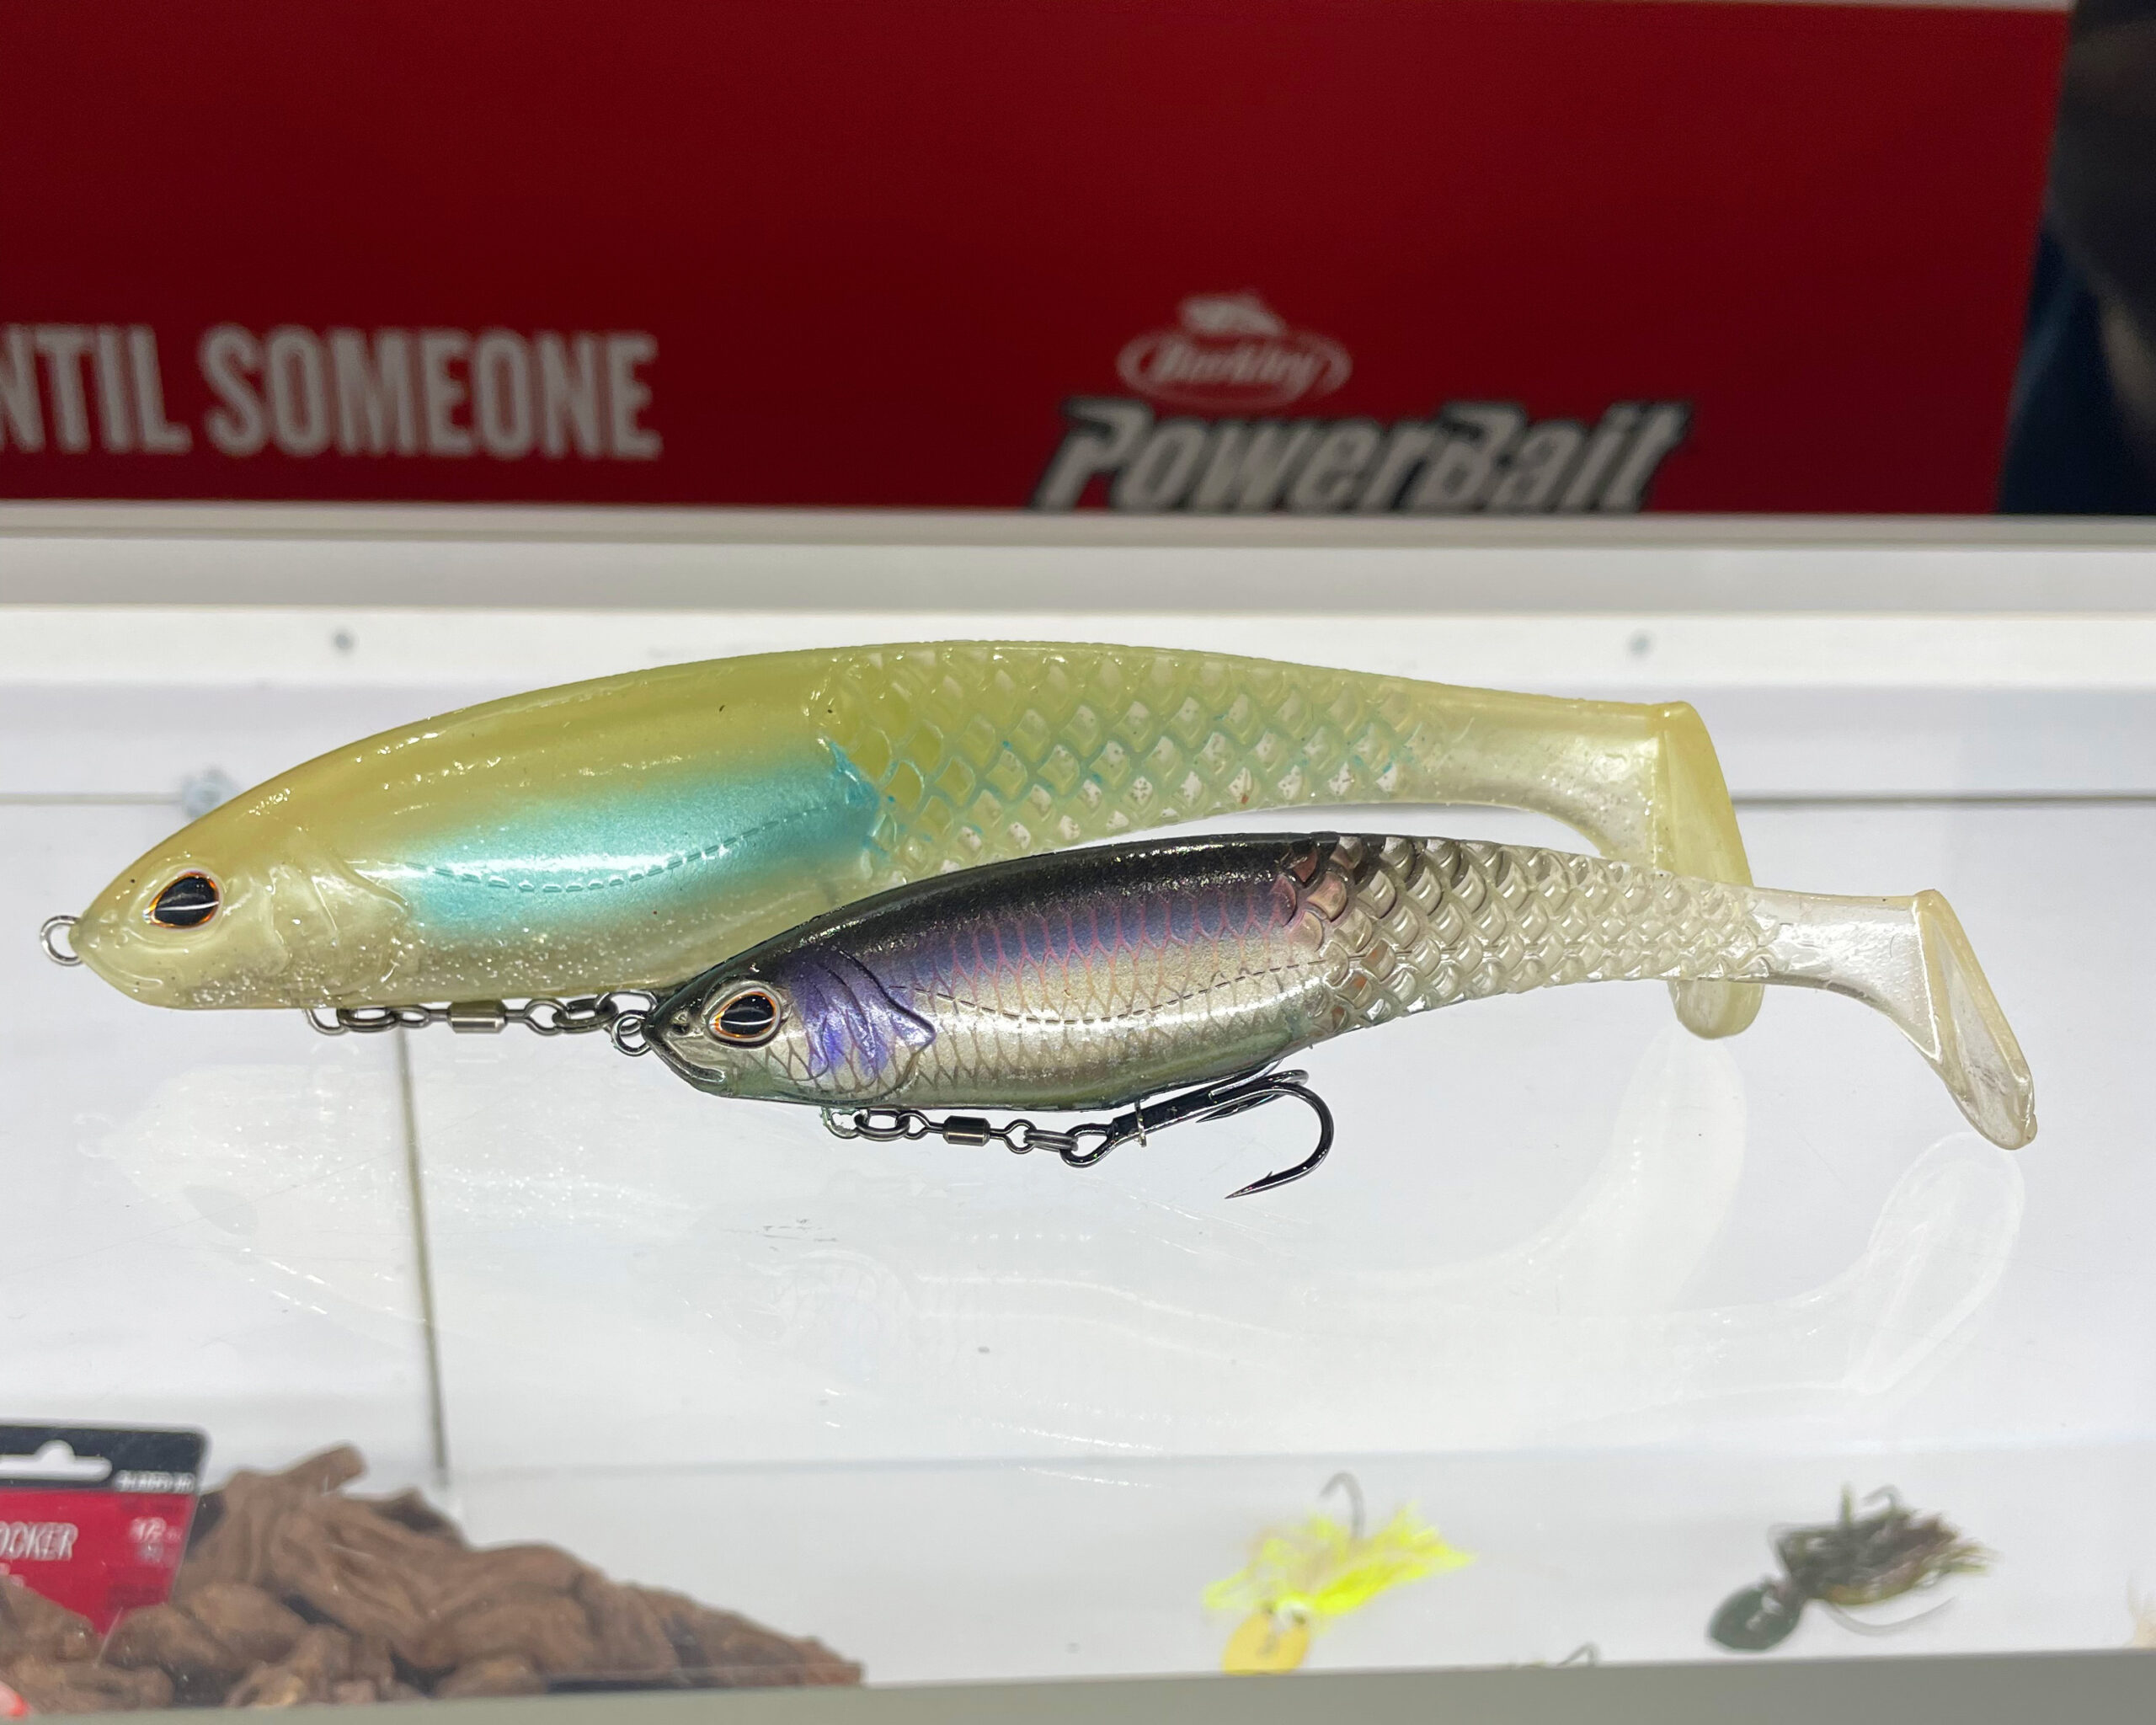 Check out more of the all new Cull Shad color lineup👀 Do you